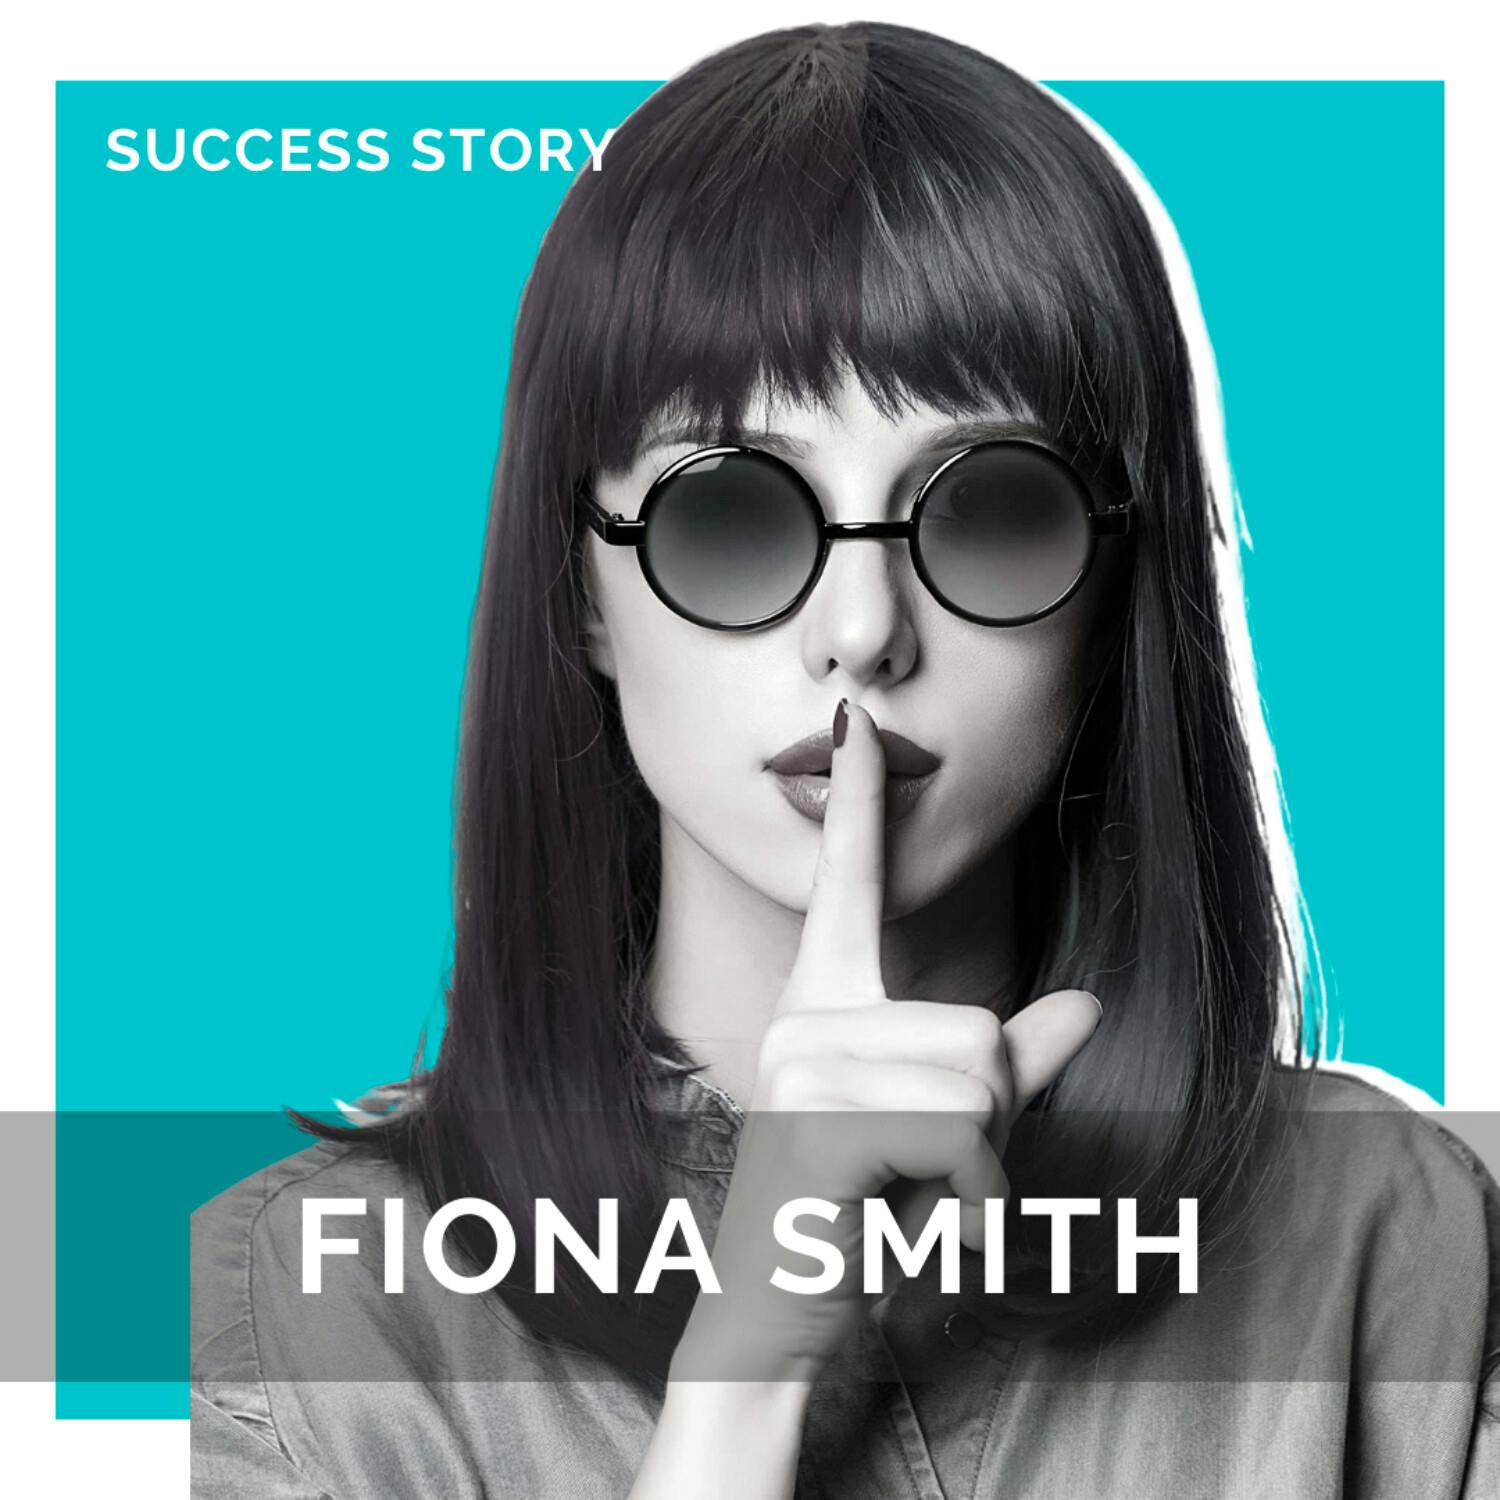 Fiona Smith, Founder of Millennial Money Woman | How to Quit Your Job & Become a Millionaire